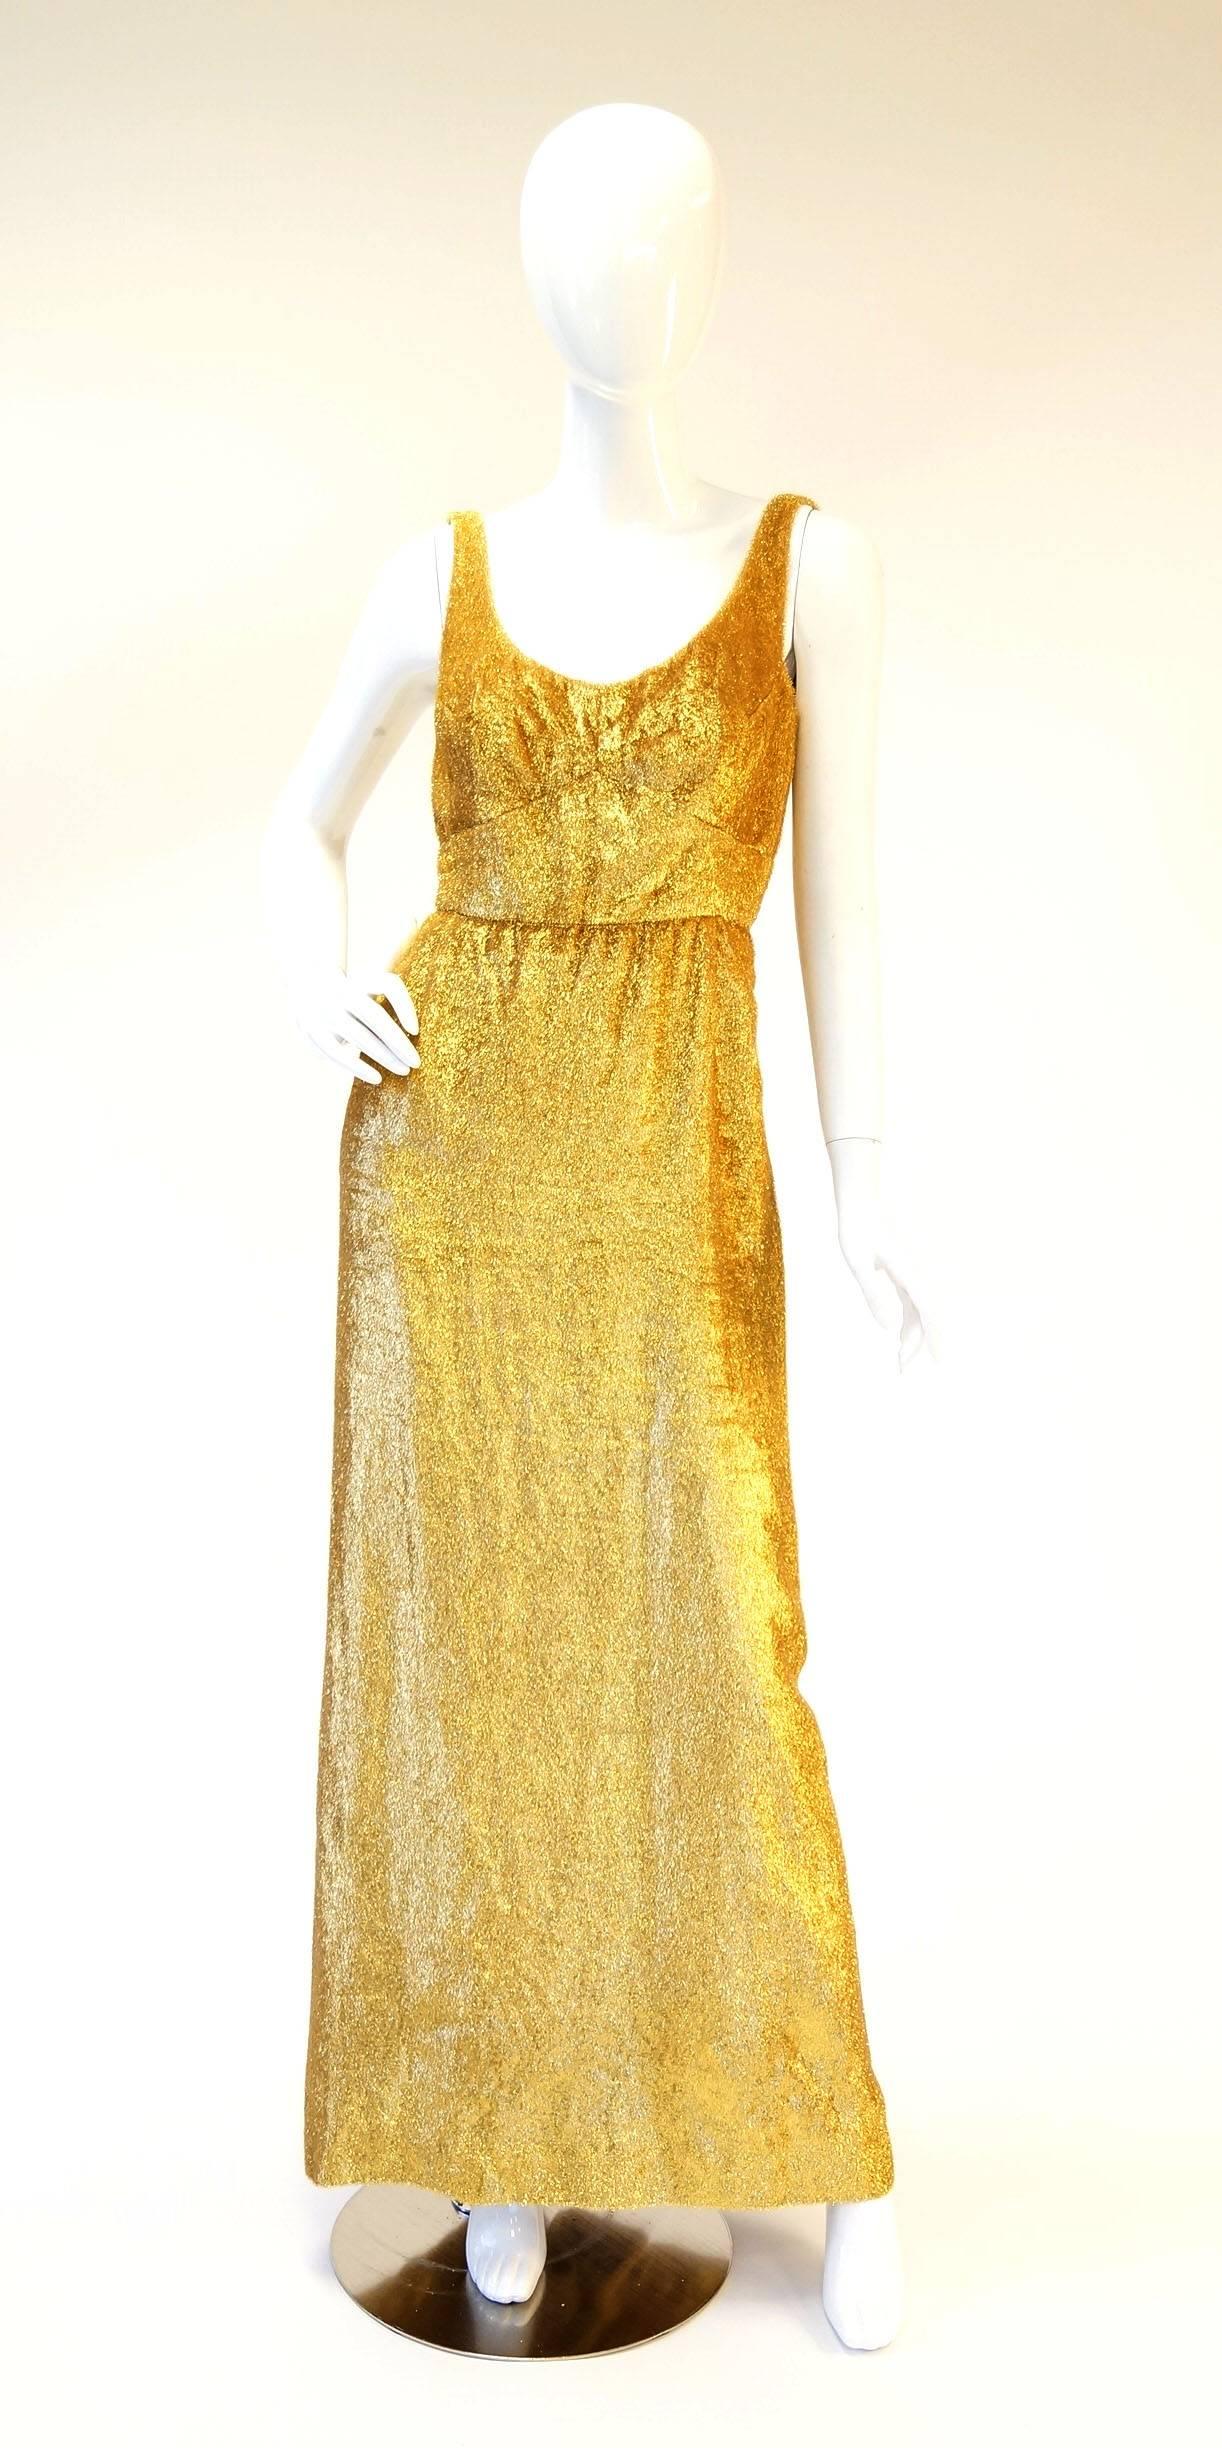 Vintage Norman Hartnell Gold Lamé and Mink Evening Dress and Matching Coat

Stunning Norman Hartnell gold lamé evening dress and matching coat. The shimmering A-line dress features a low scoop neck, a geometric stitched bodice, a low back, and a